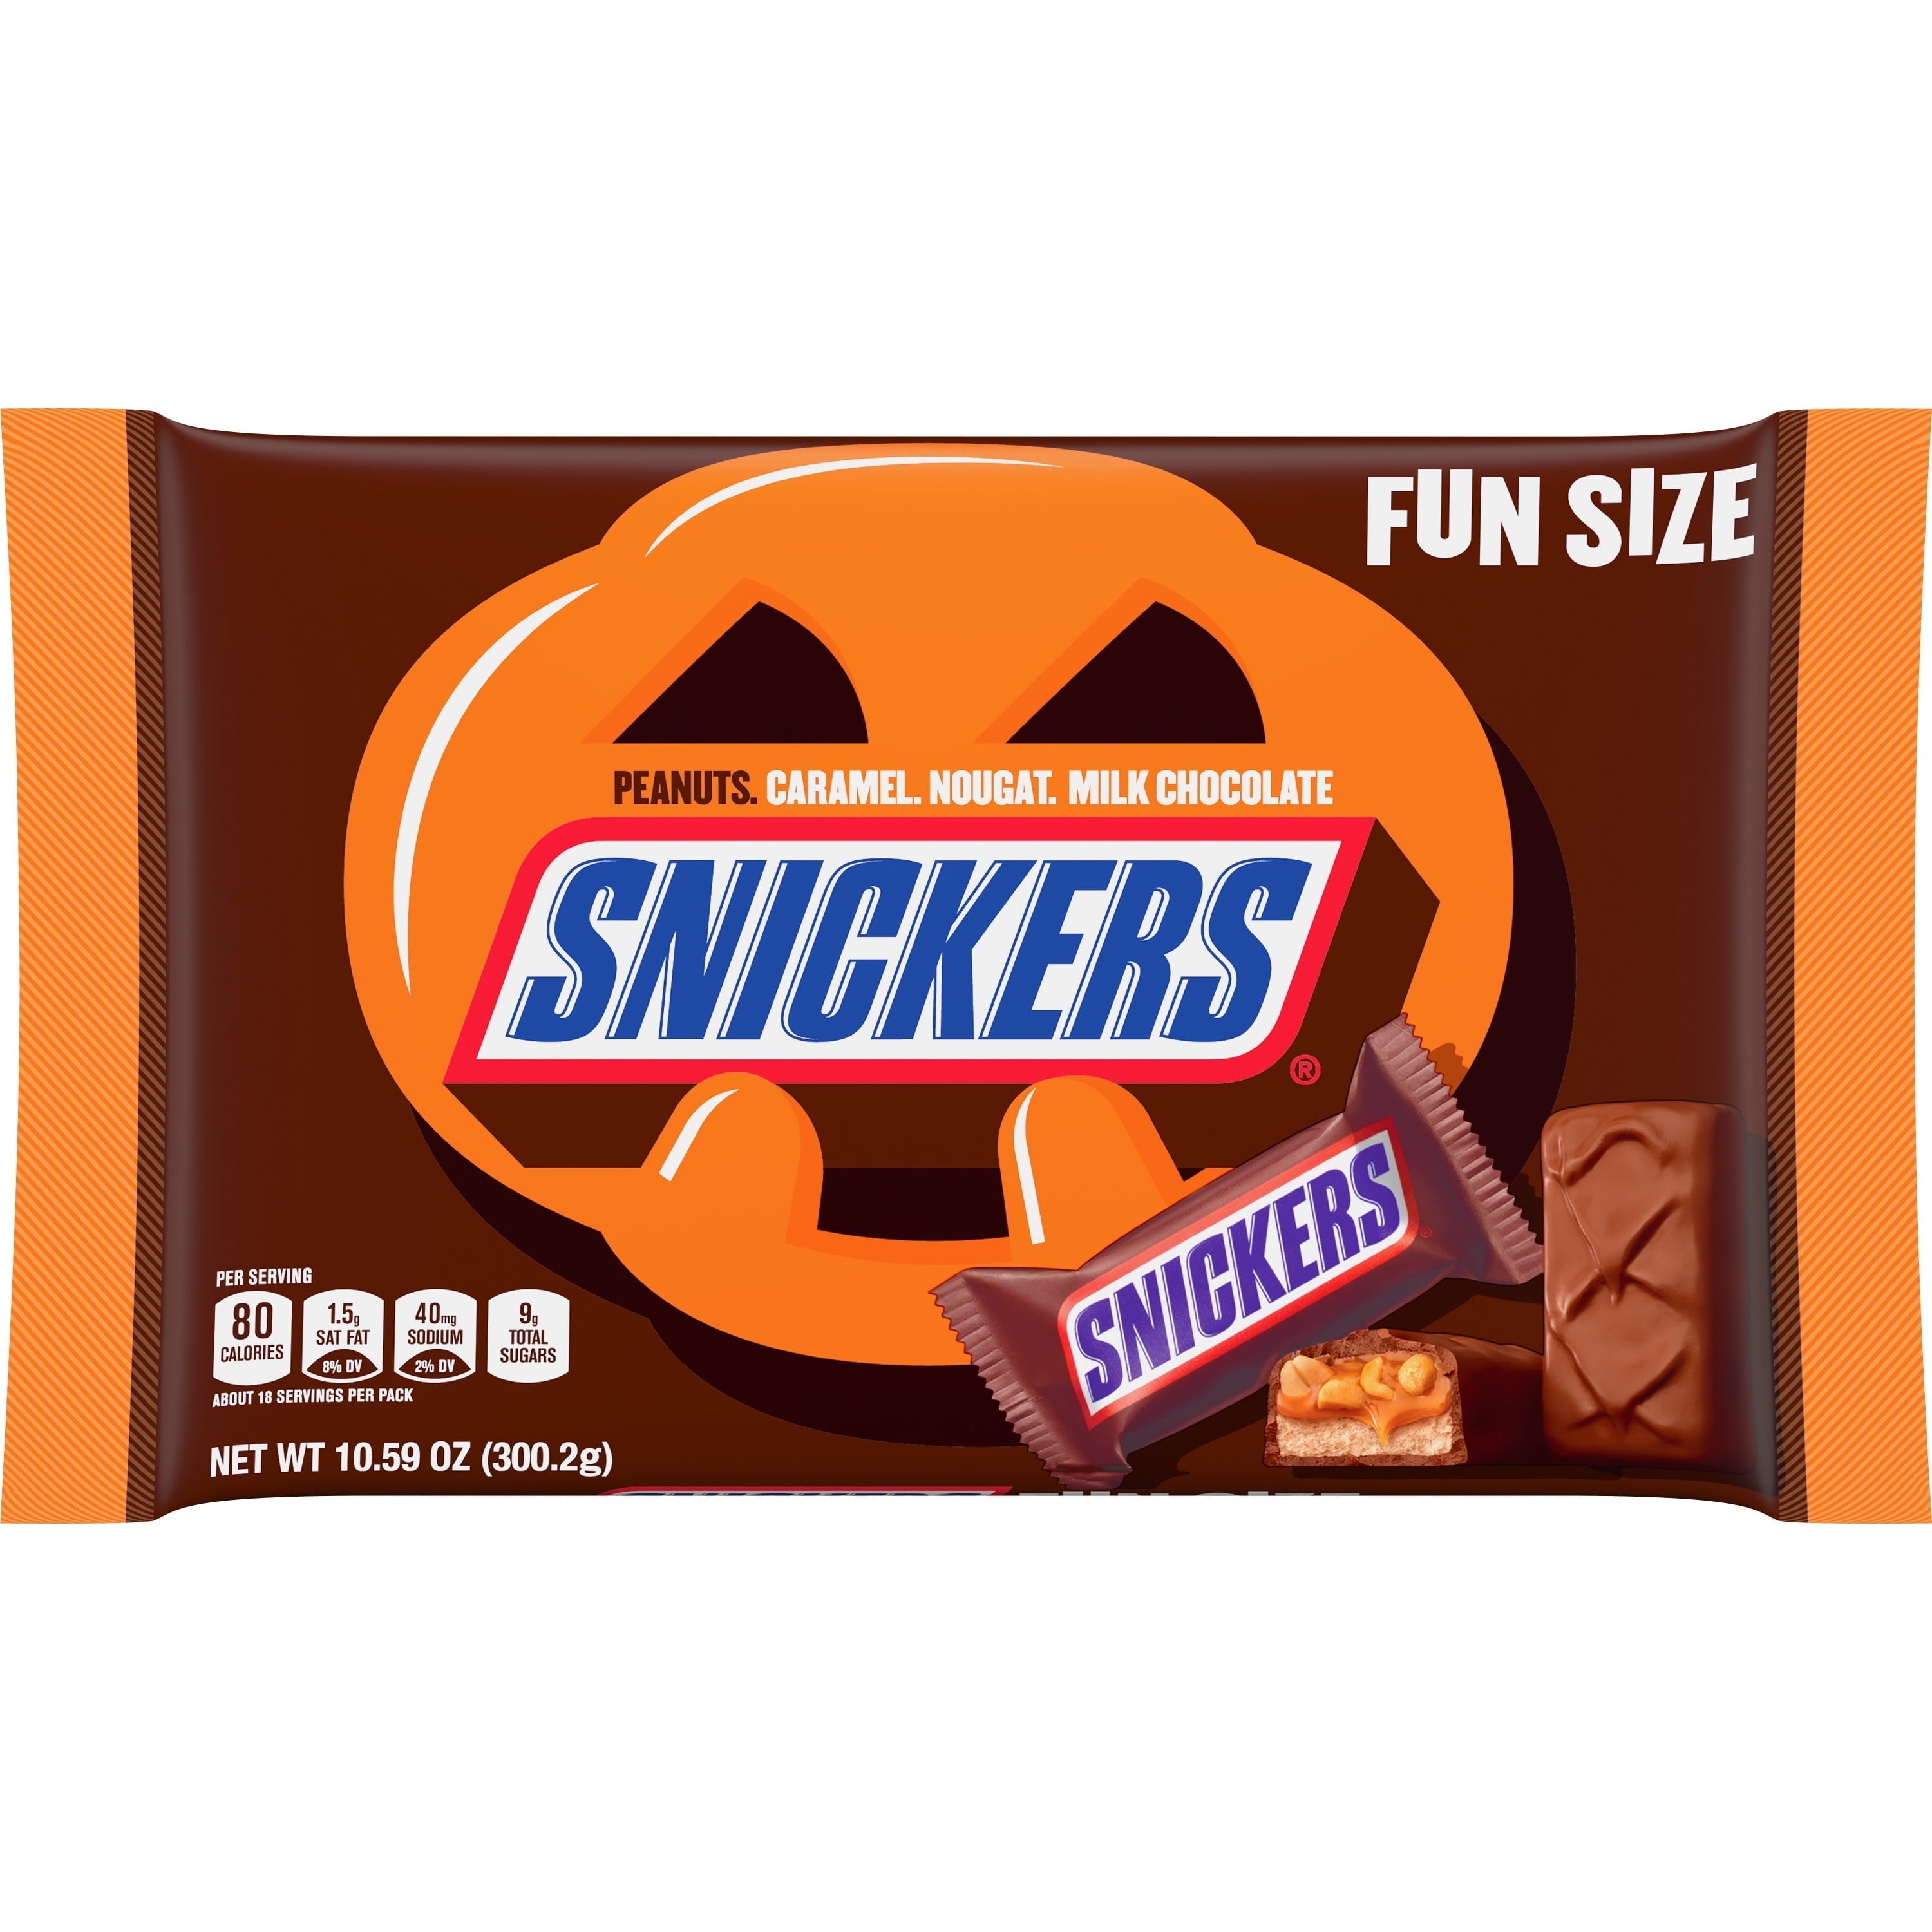 Wholesale prices with free shipping all over United States Snickers Fun Size Halloween Chocolate Candy Bars, 10.59 oz Bag - Steven Deals